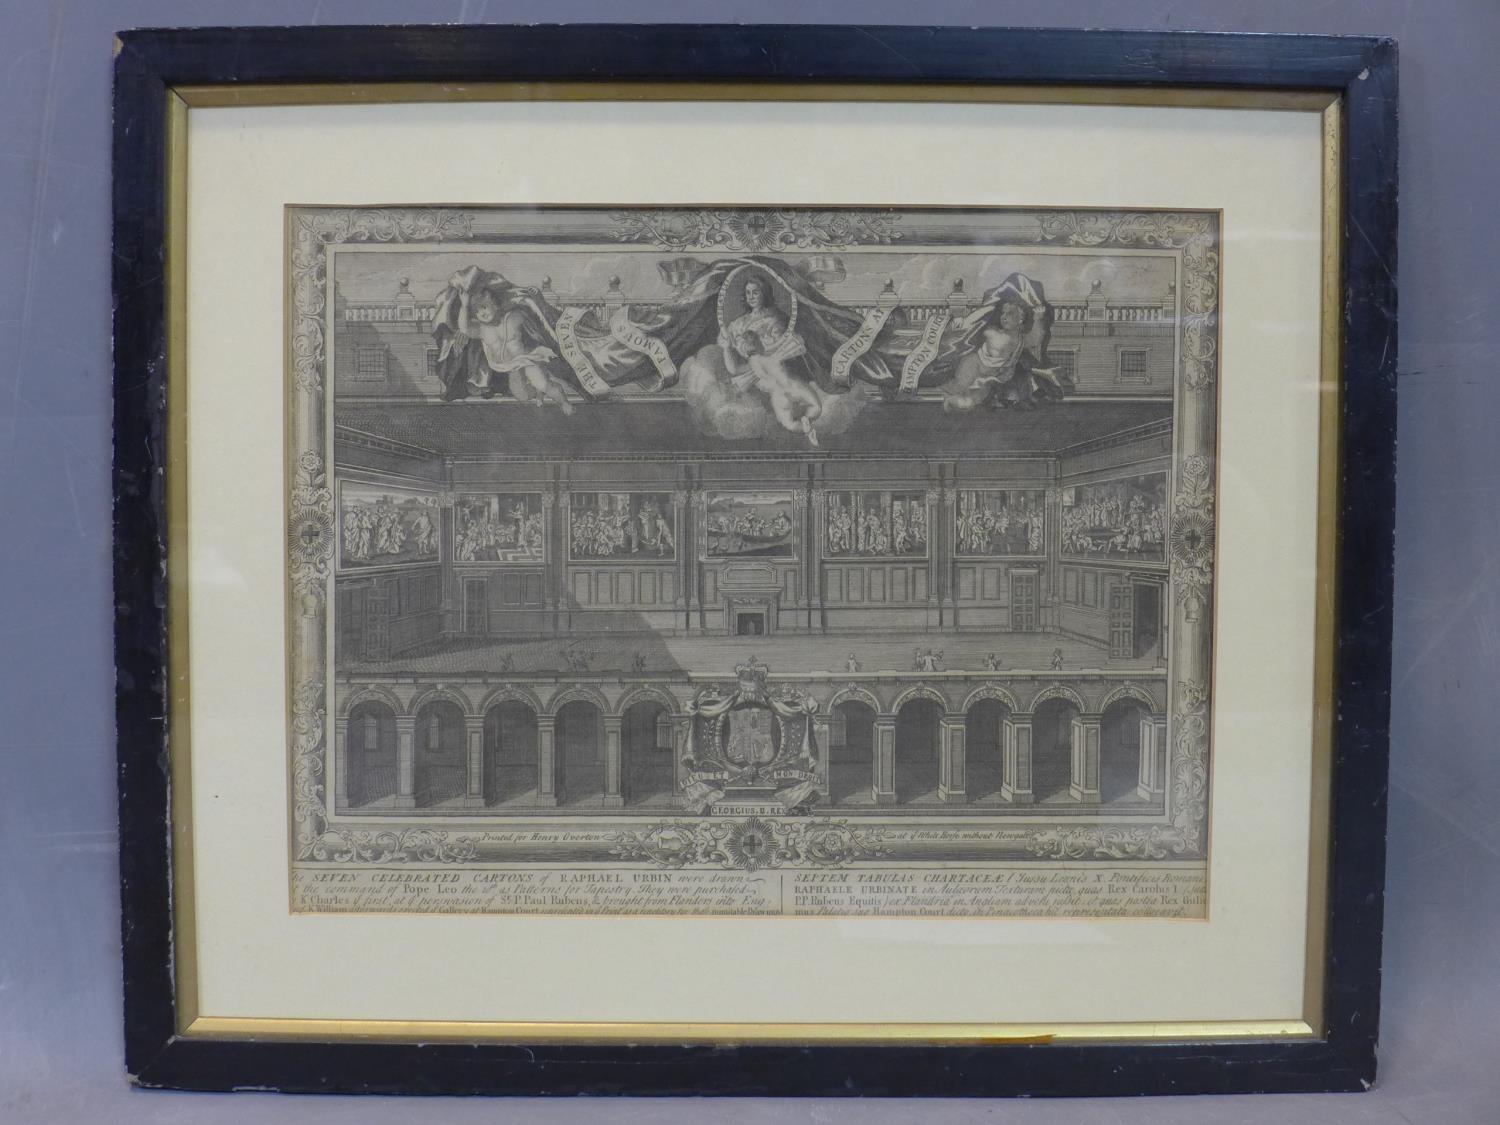 An antique print of an 18th century engraving of 'The Seven Famous Cartons at Hampton Court', the - Image 2 of 2